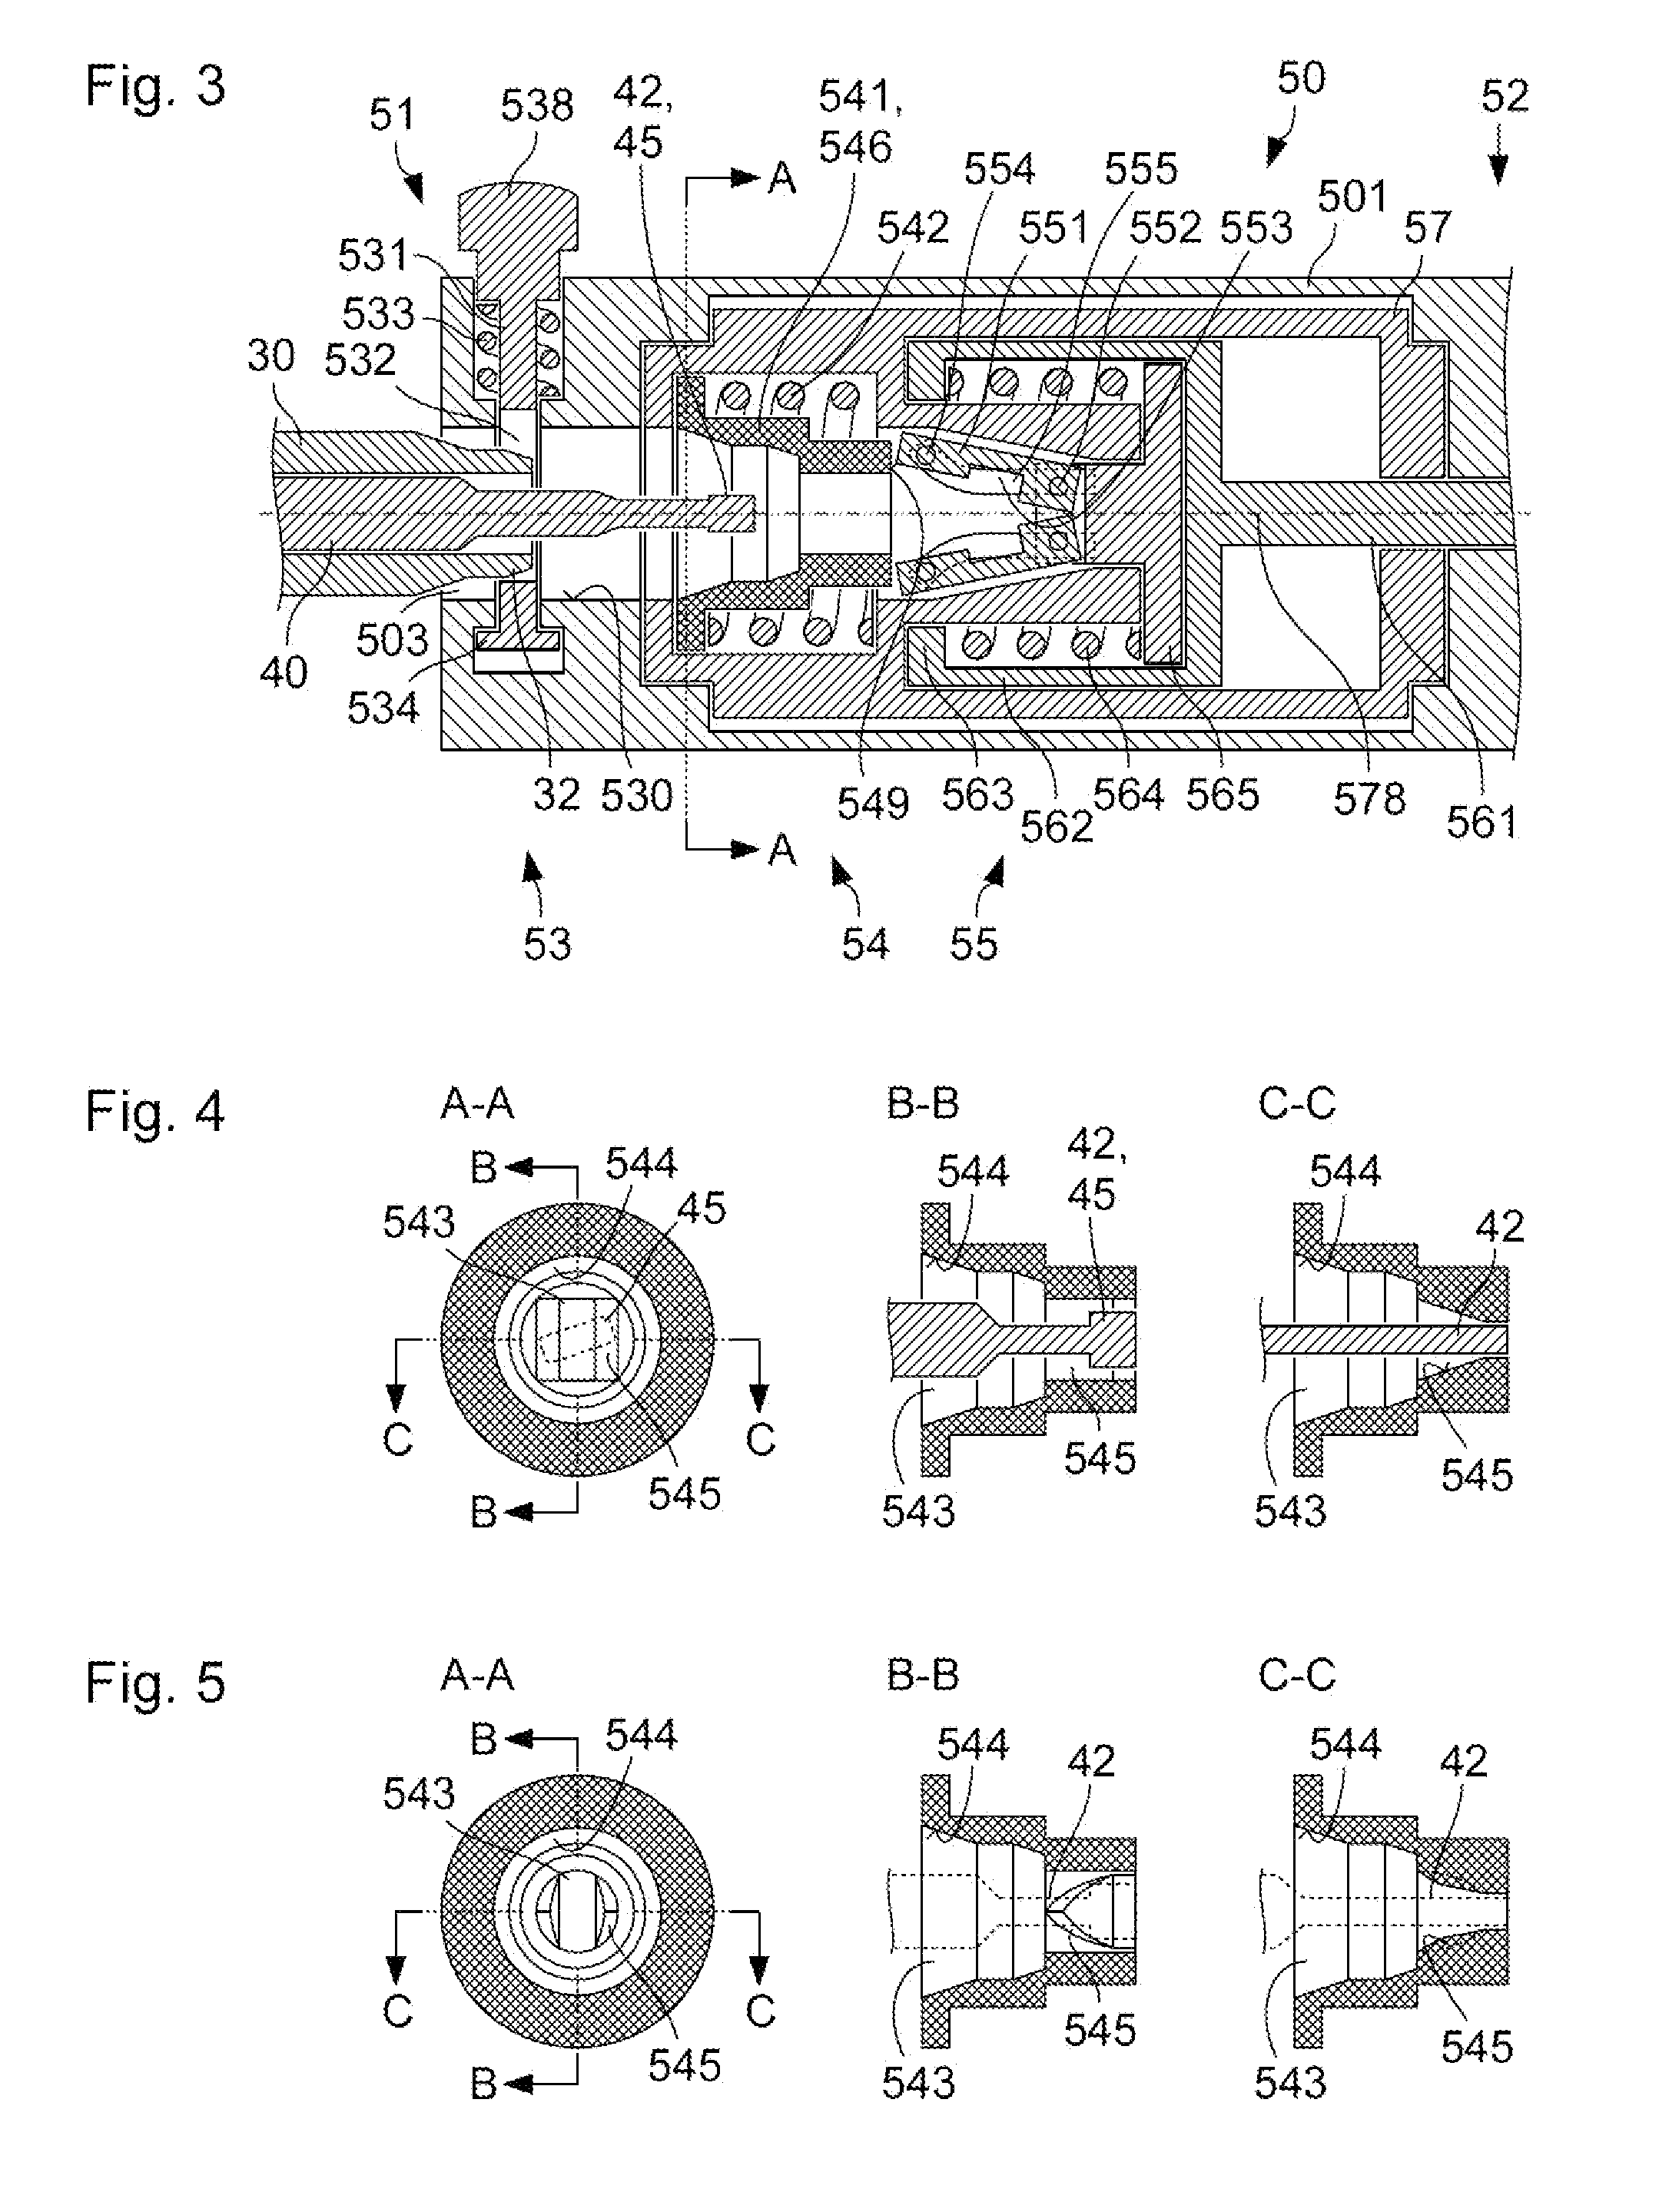 Handling device for a micro-invasive surgical instrument